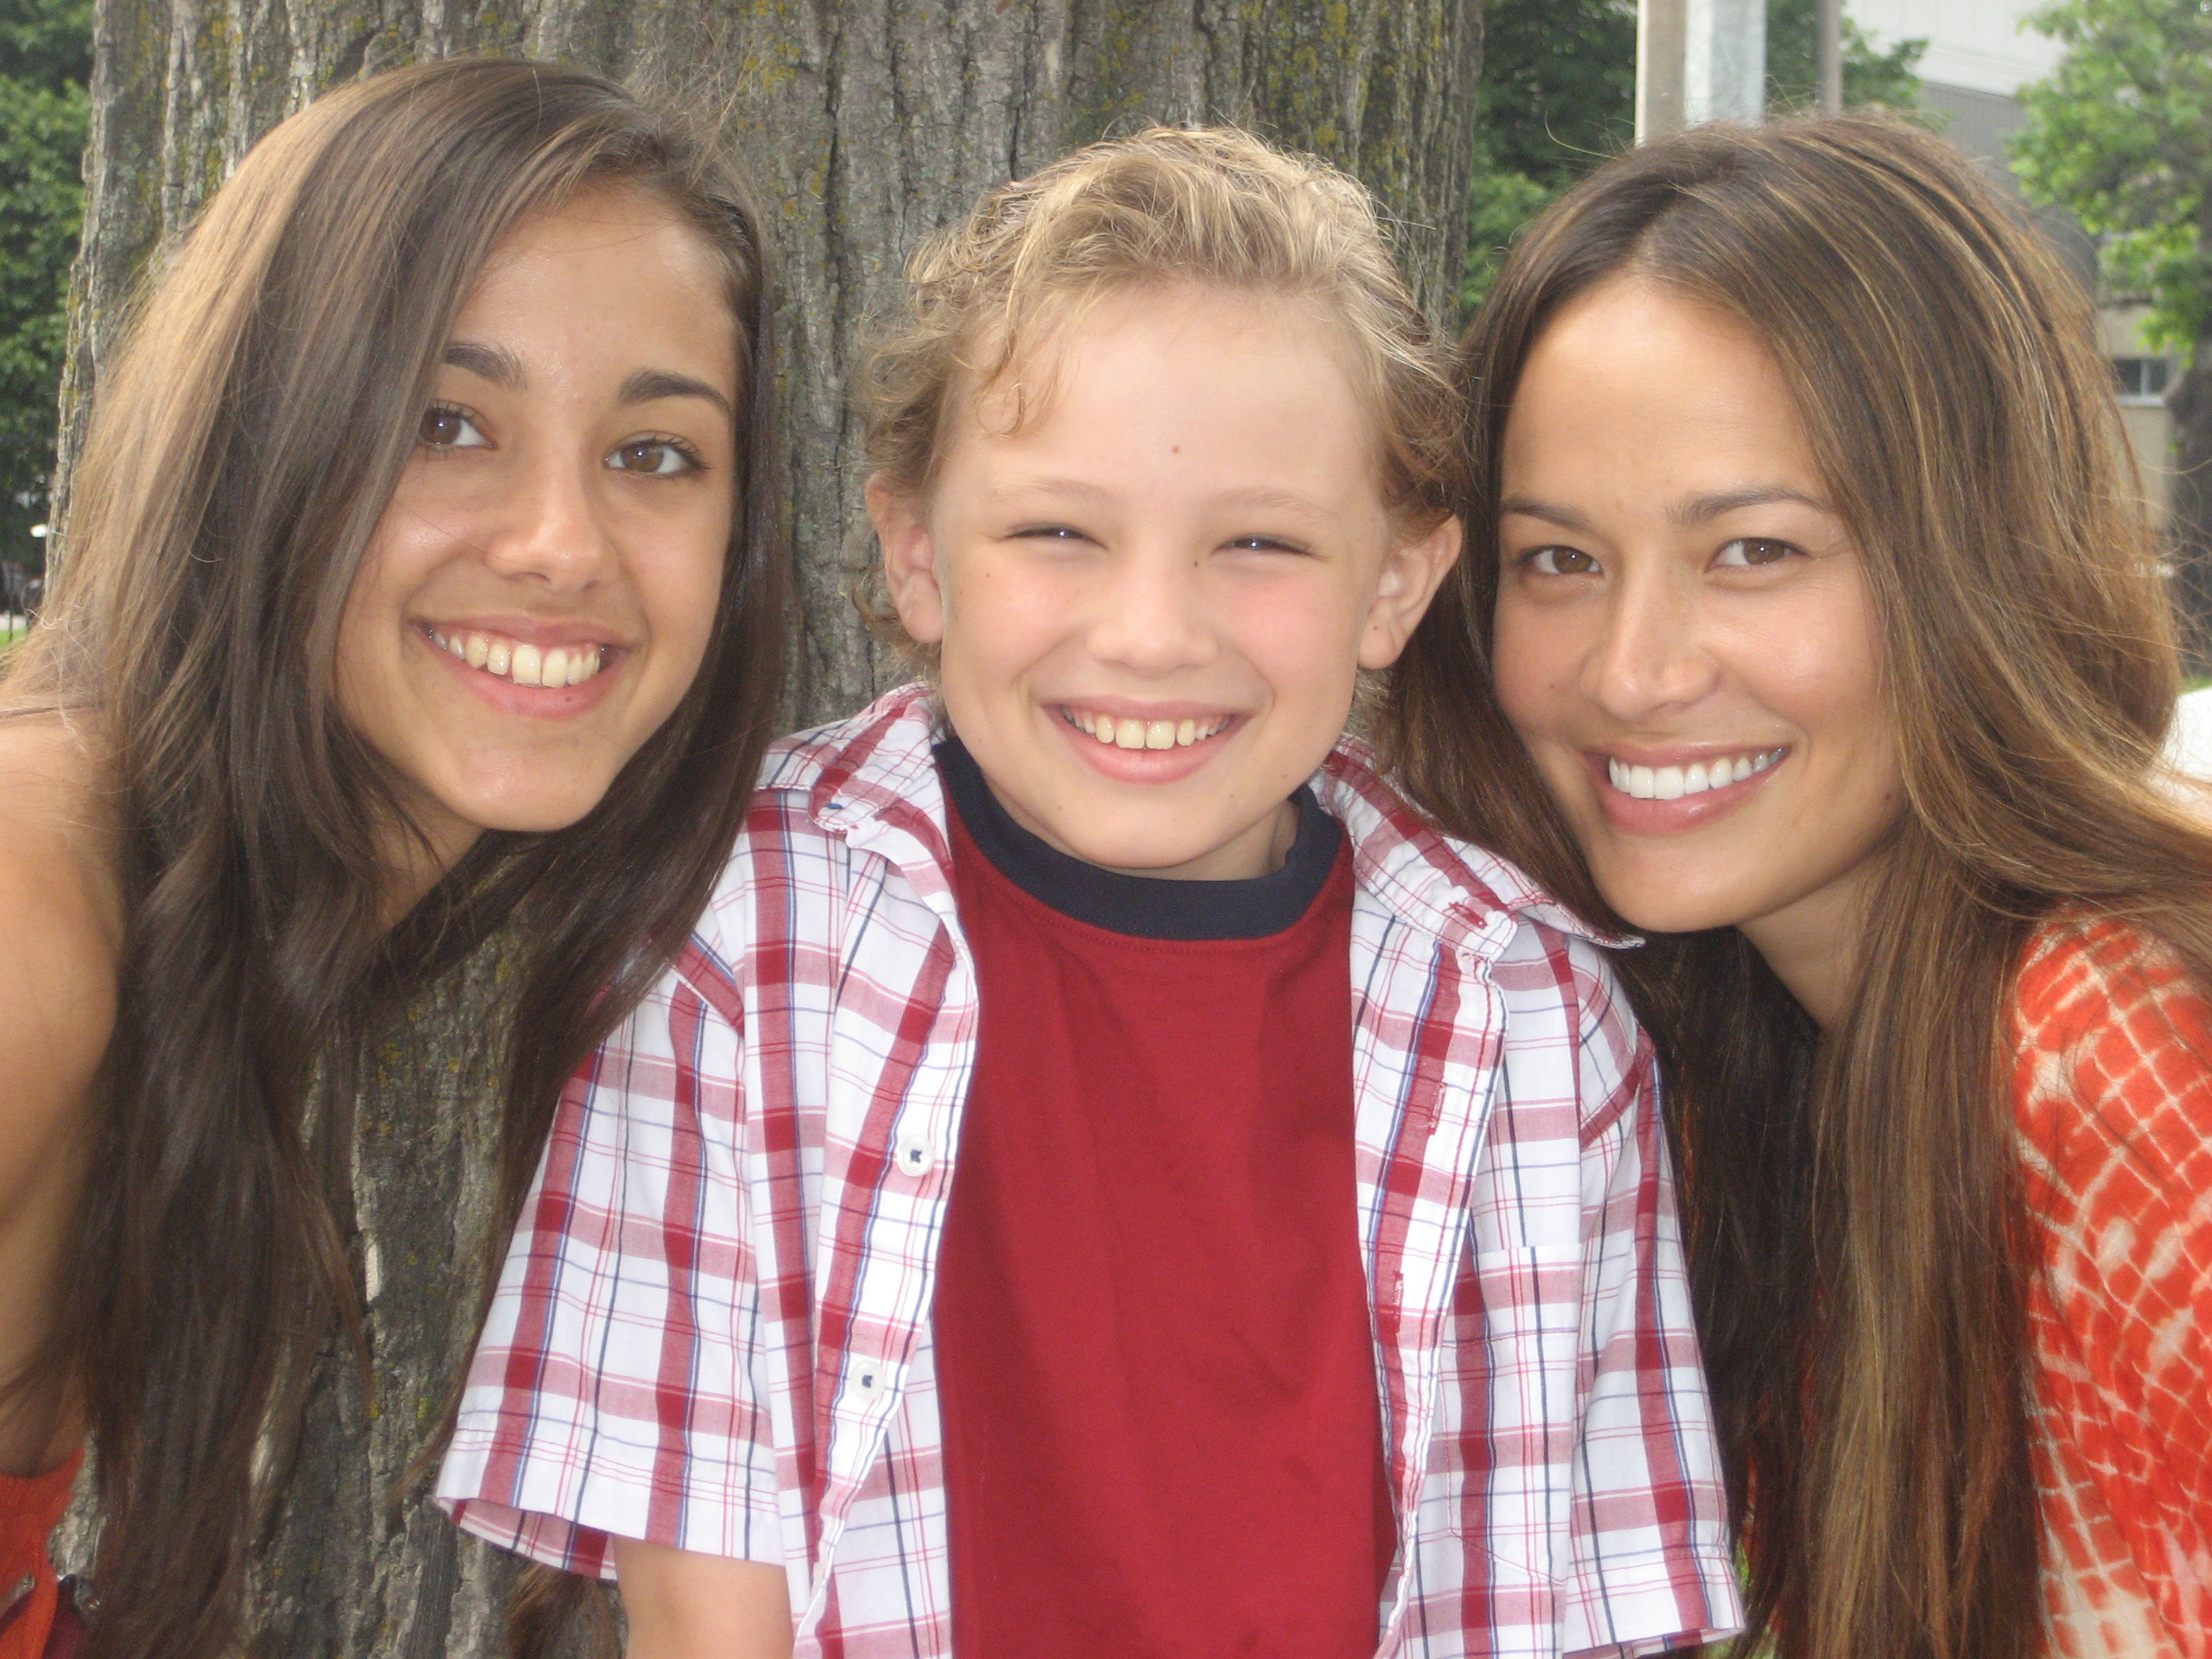 Max with Miss Moon Bloodgood and Miss Seychelle Gabriel